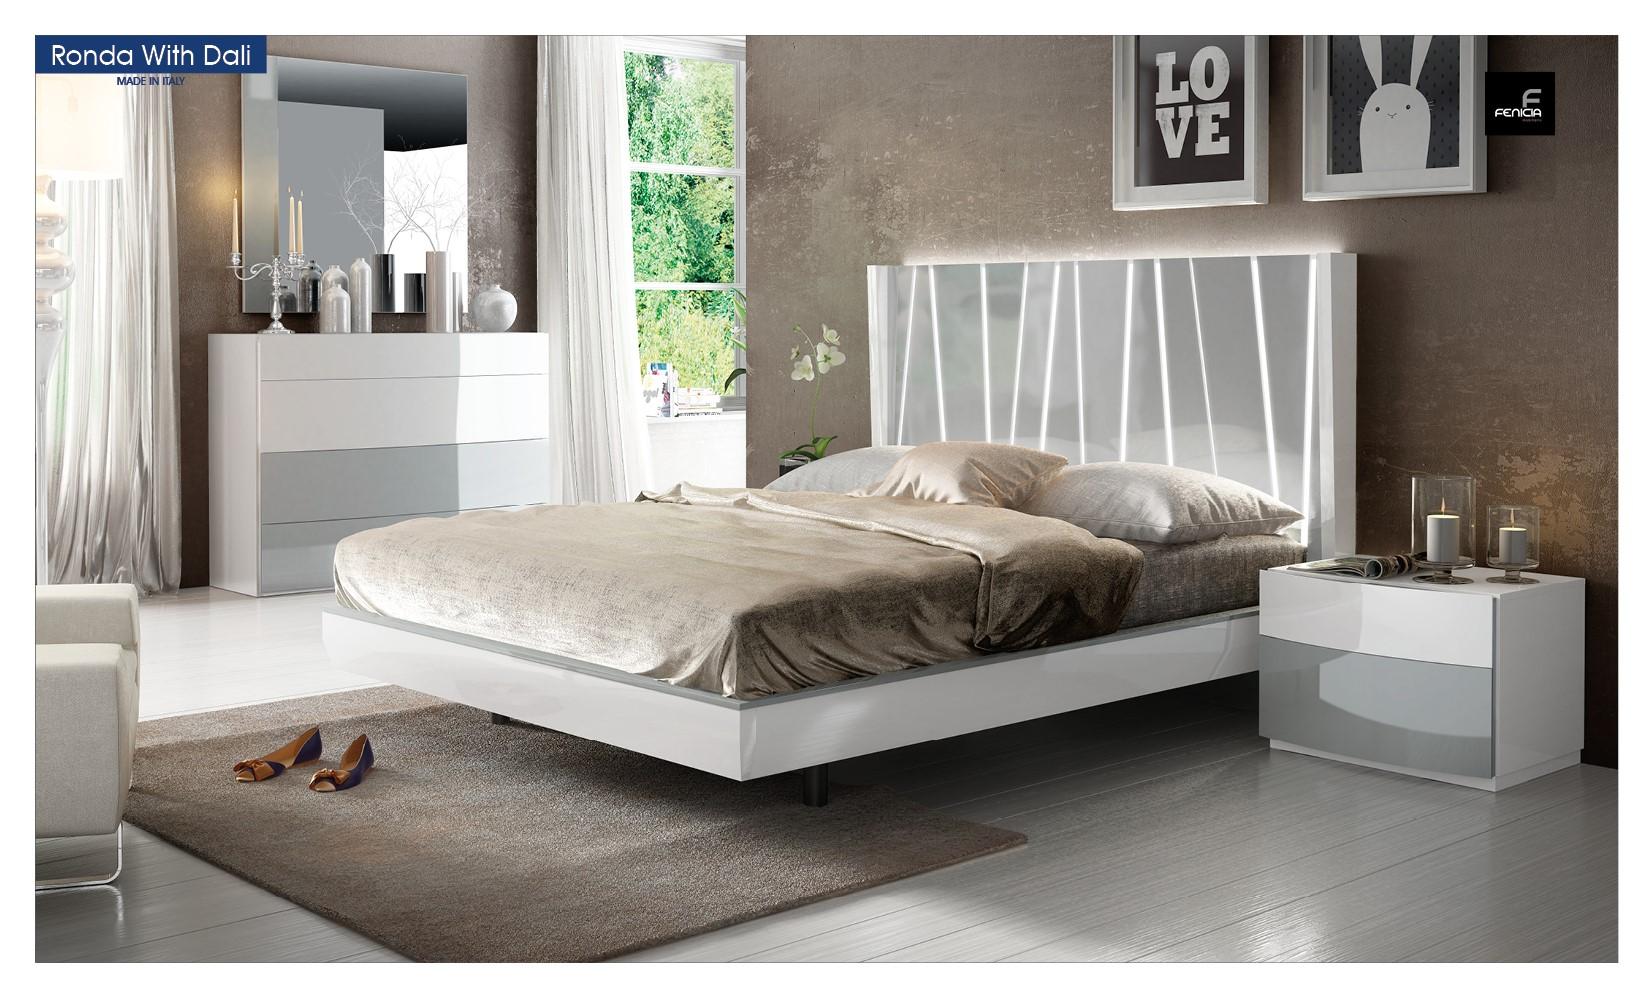 

    
White & Gray Laquer Finish Queen Bed & 2 Nightstands Spain ESF Ronda DALI
